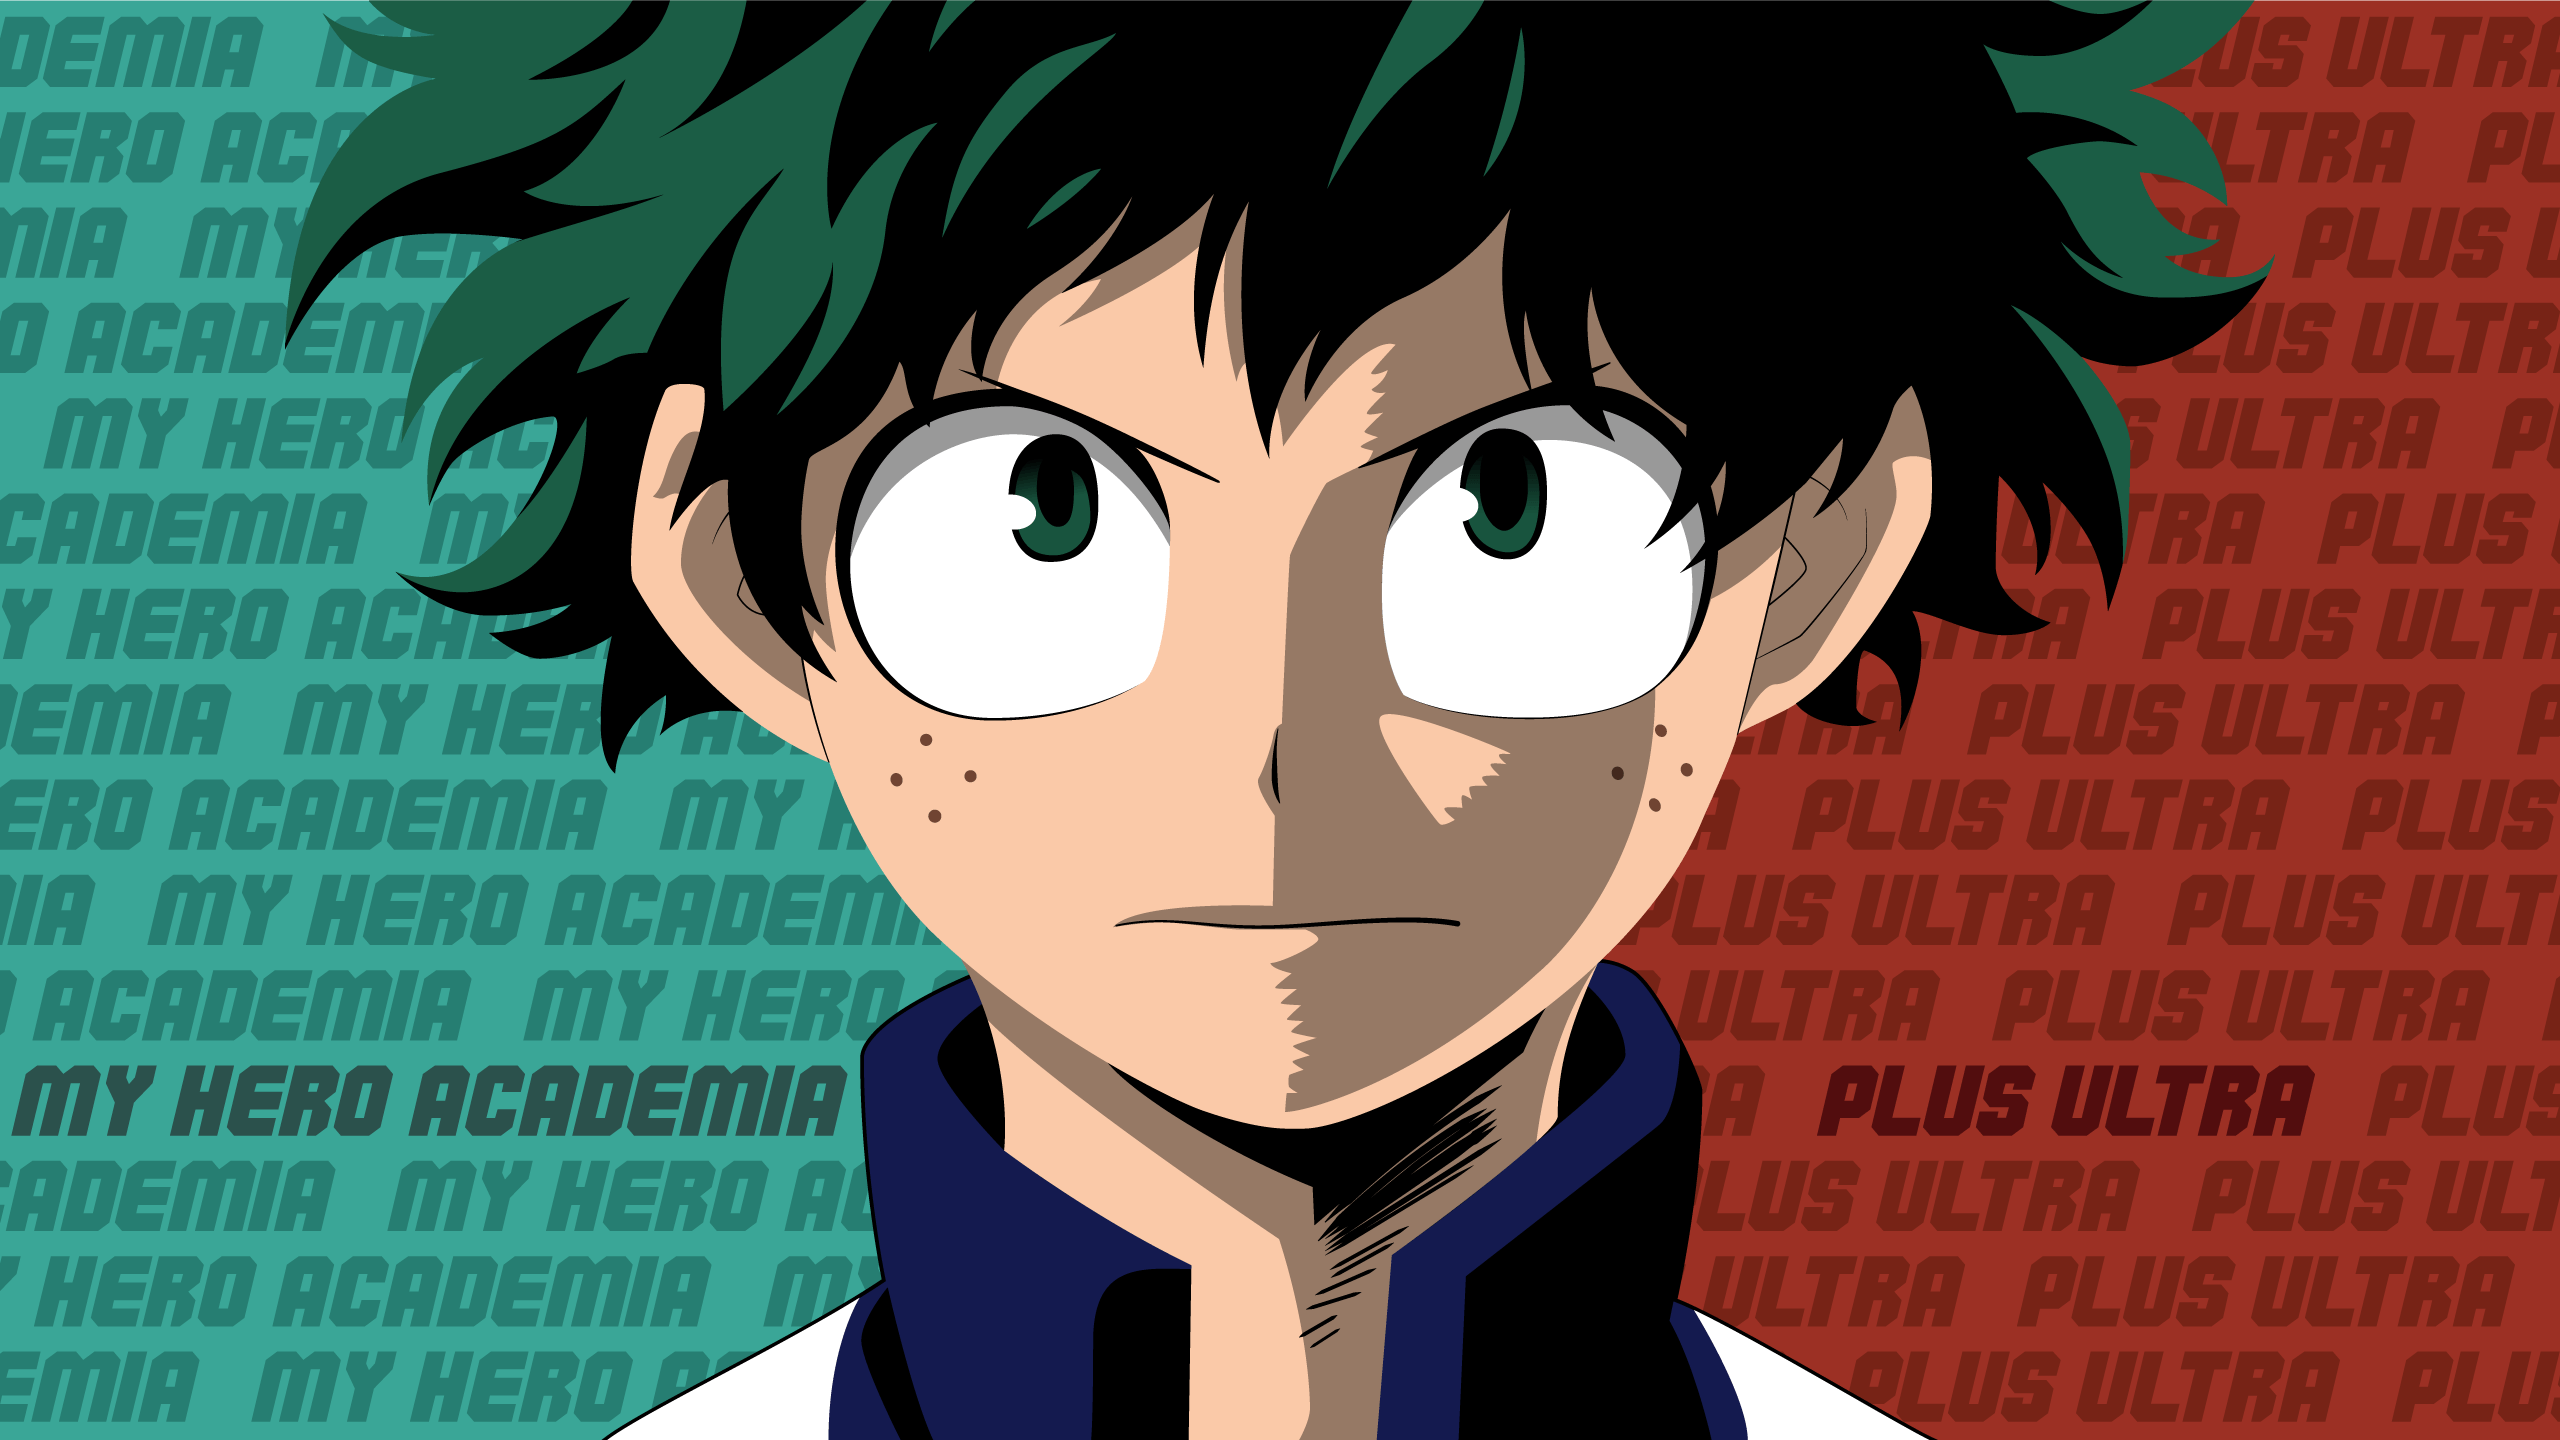 Boku No Hero Academia Wallpaper I Made From Re Drawing A Frame Out The Anime. Critique Welcome!